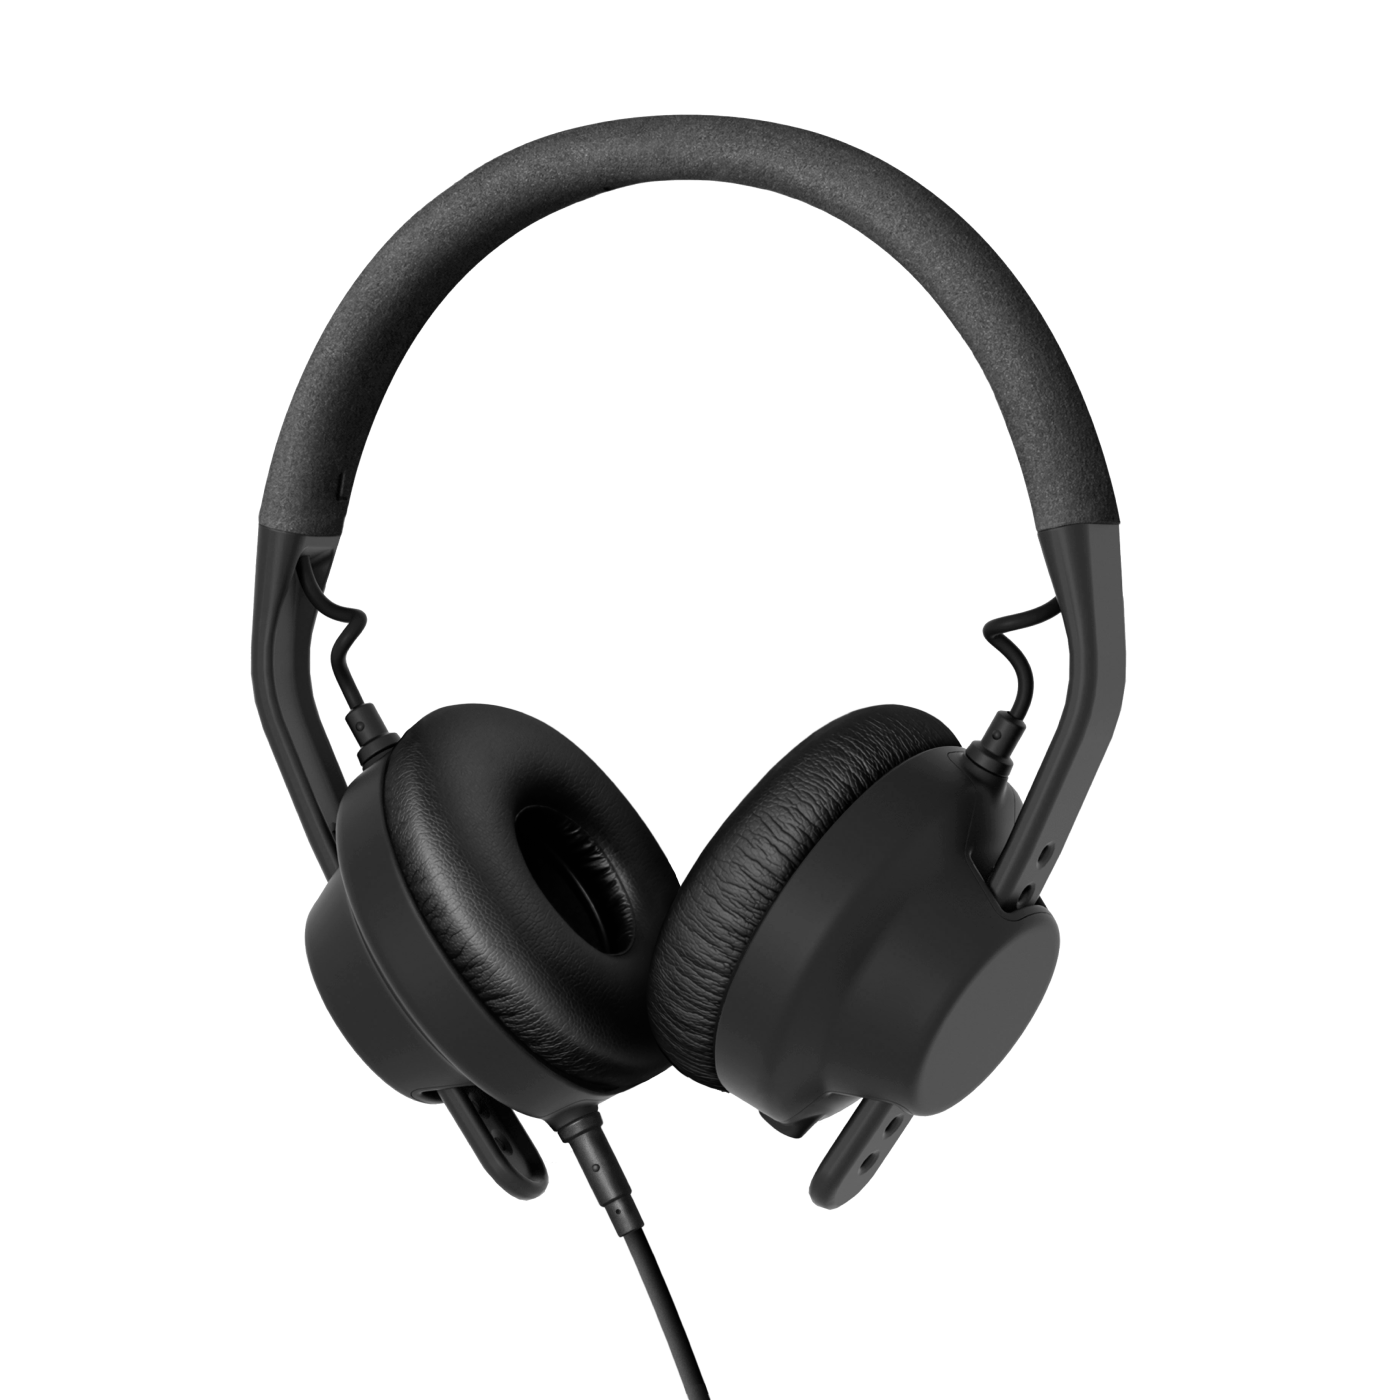 Fnatic Casque Gaming Gear Duel (Over-Ear et on-Ear, Microphone